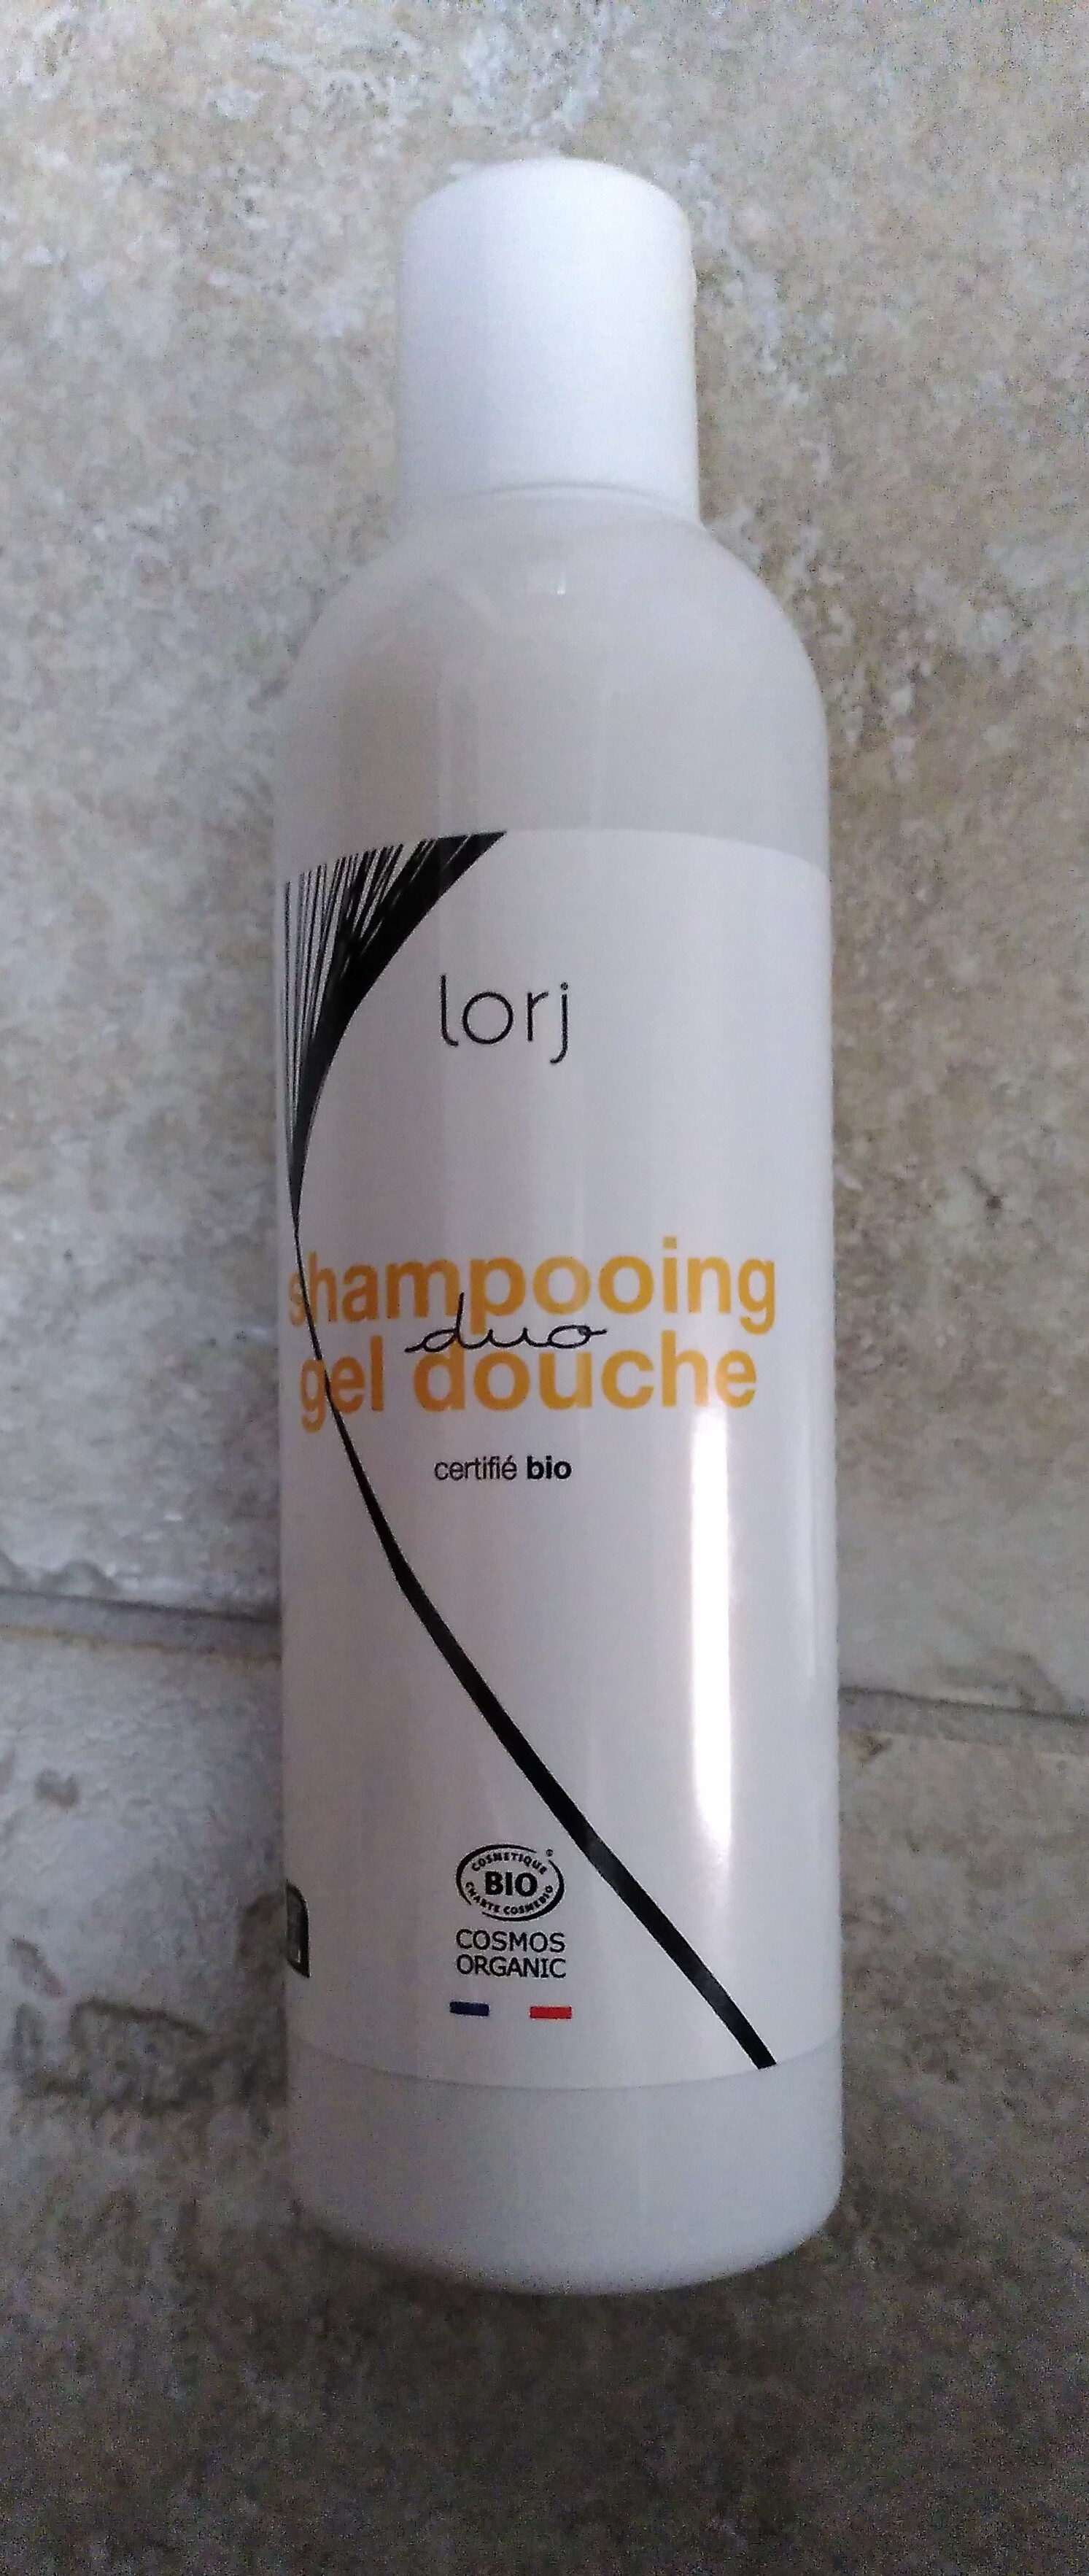 Duo shampoing gel douche - 製品 - fr